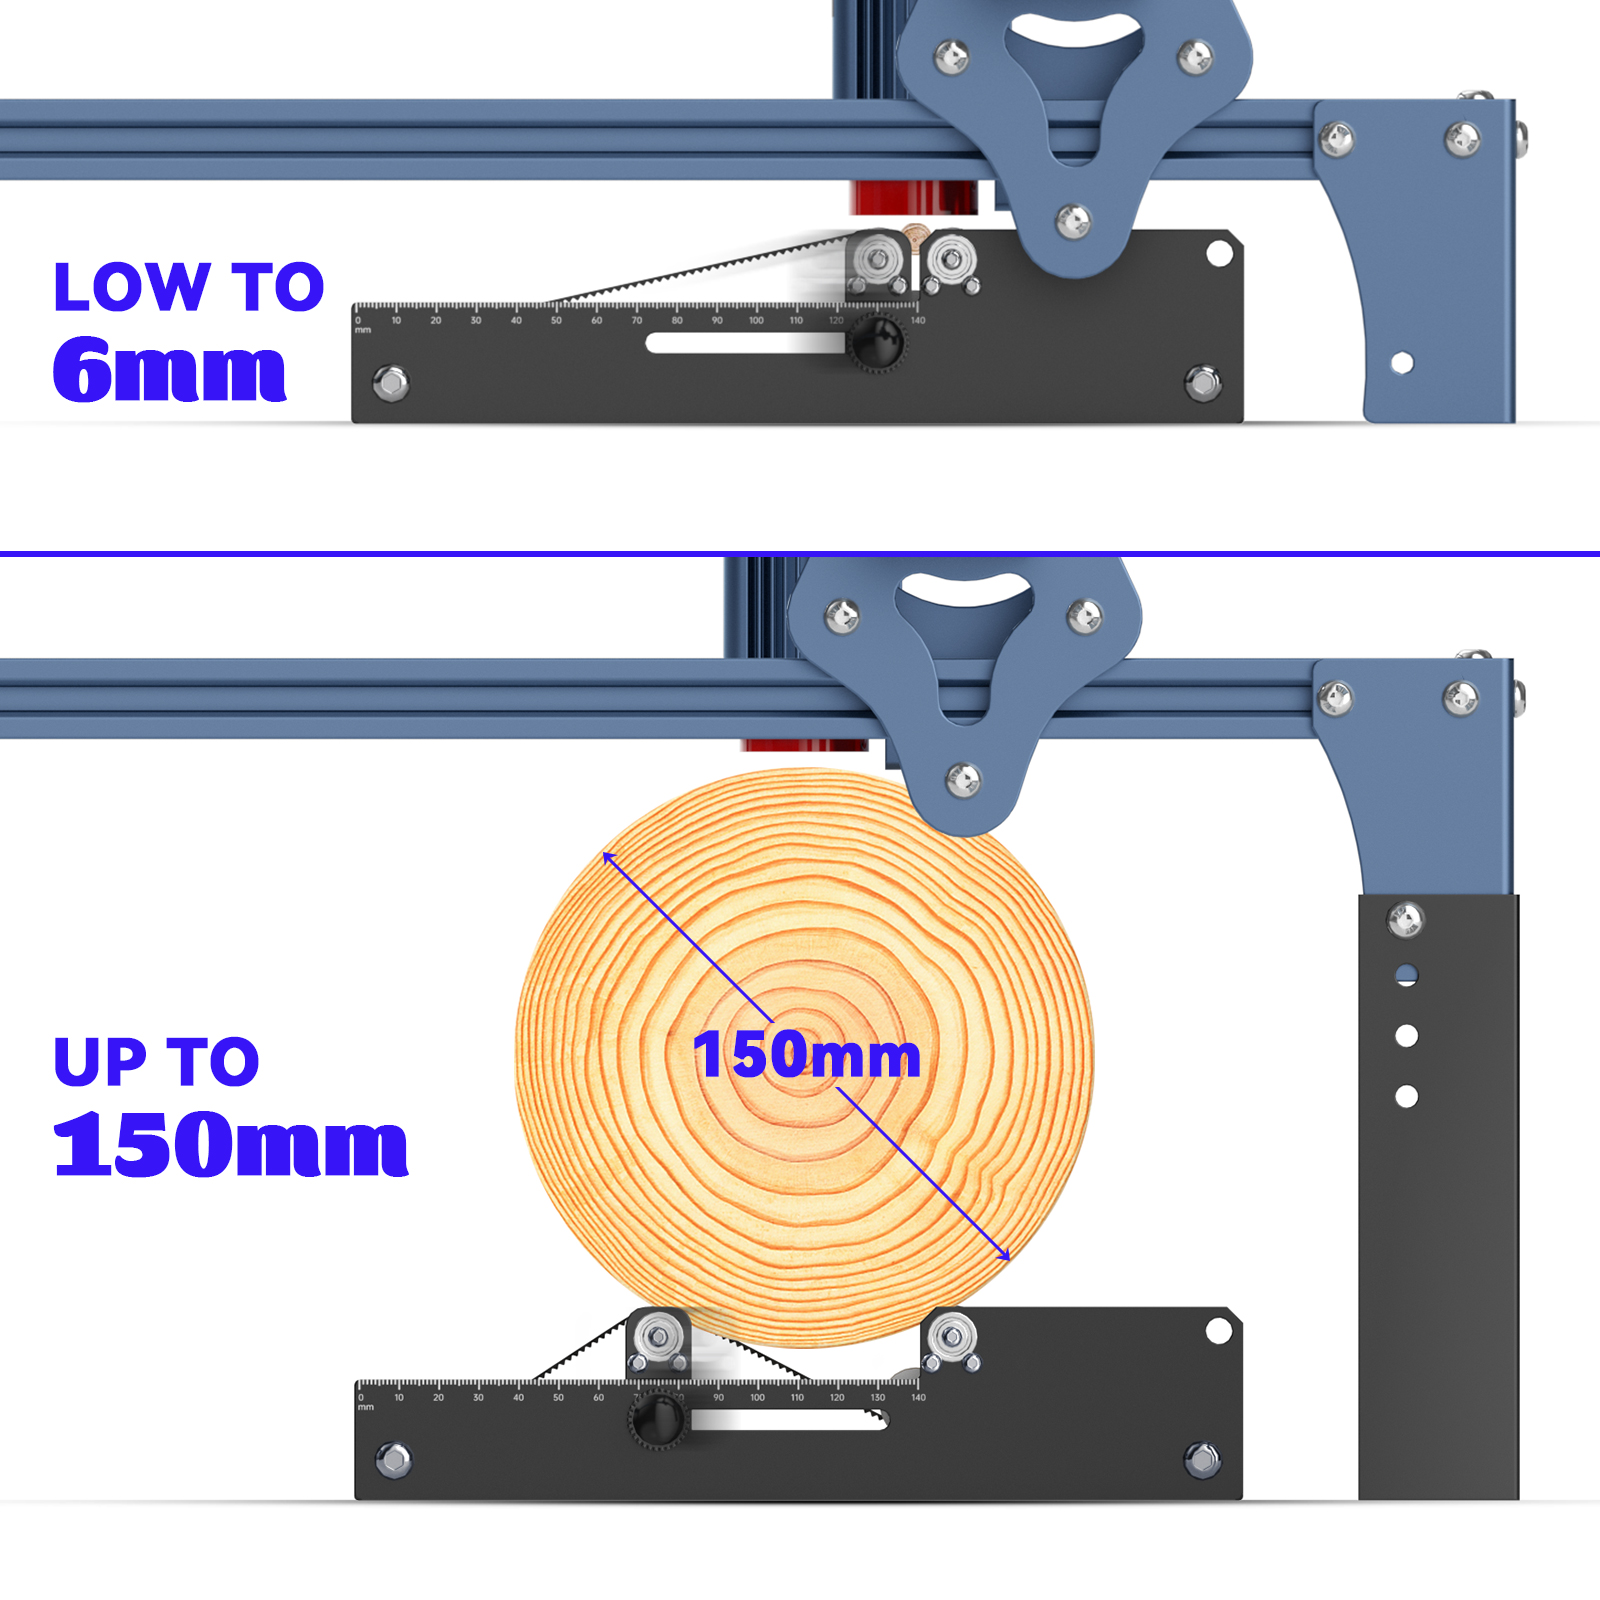 SCULPFUN-Laser-Rotary-Roller-for-S9-Laser-Engraver-Y-axis-Roller-360-degree-Rotating-for-6-150mm-Eng-1934417-6